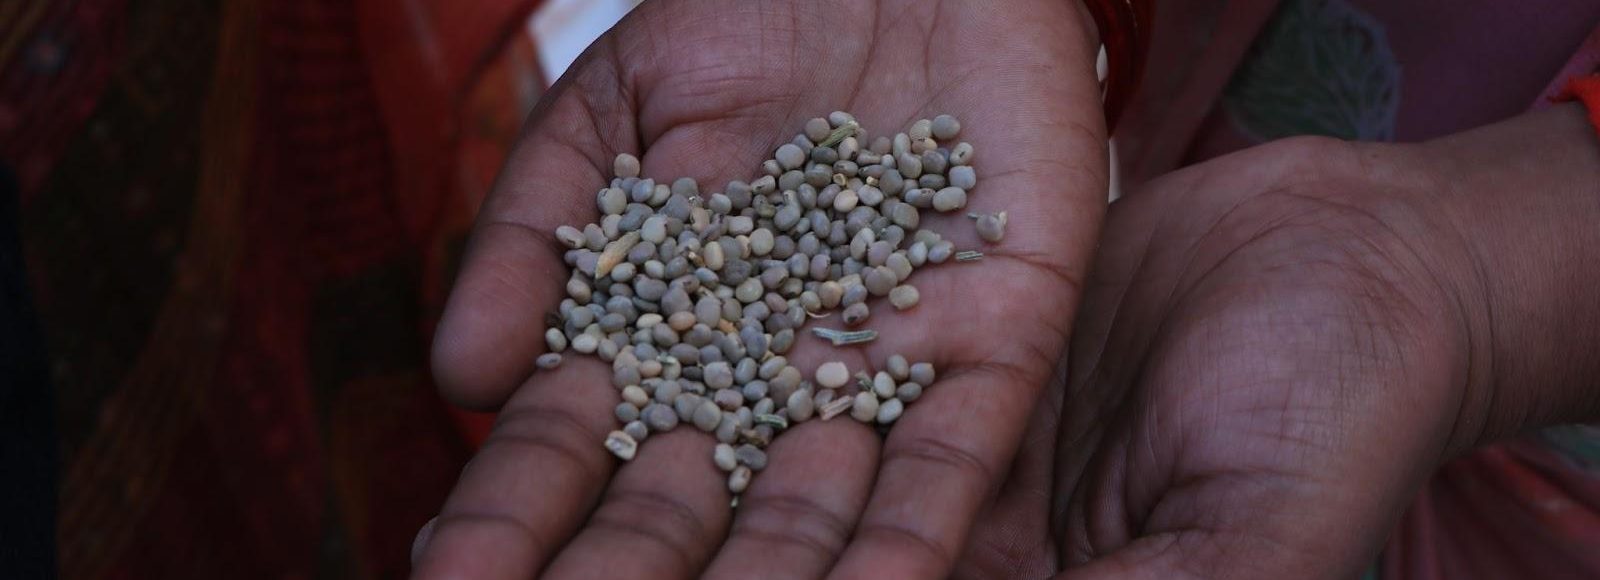 A TechnoServe SGI member holds guar beans, used to make guar gum. It is a crop that is providing incomes for farmers in arid regions of India. (TechnoServe/ Amitoj Kalsi)